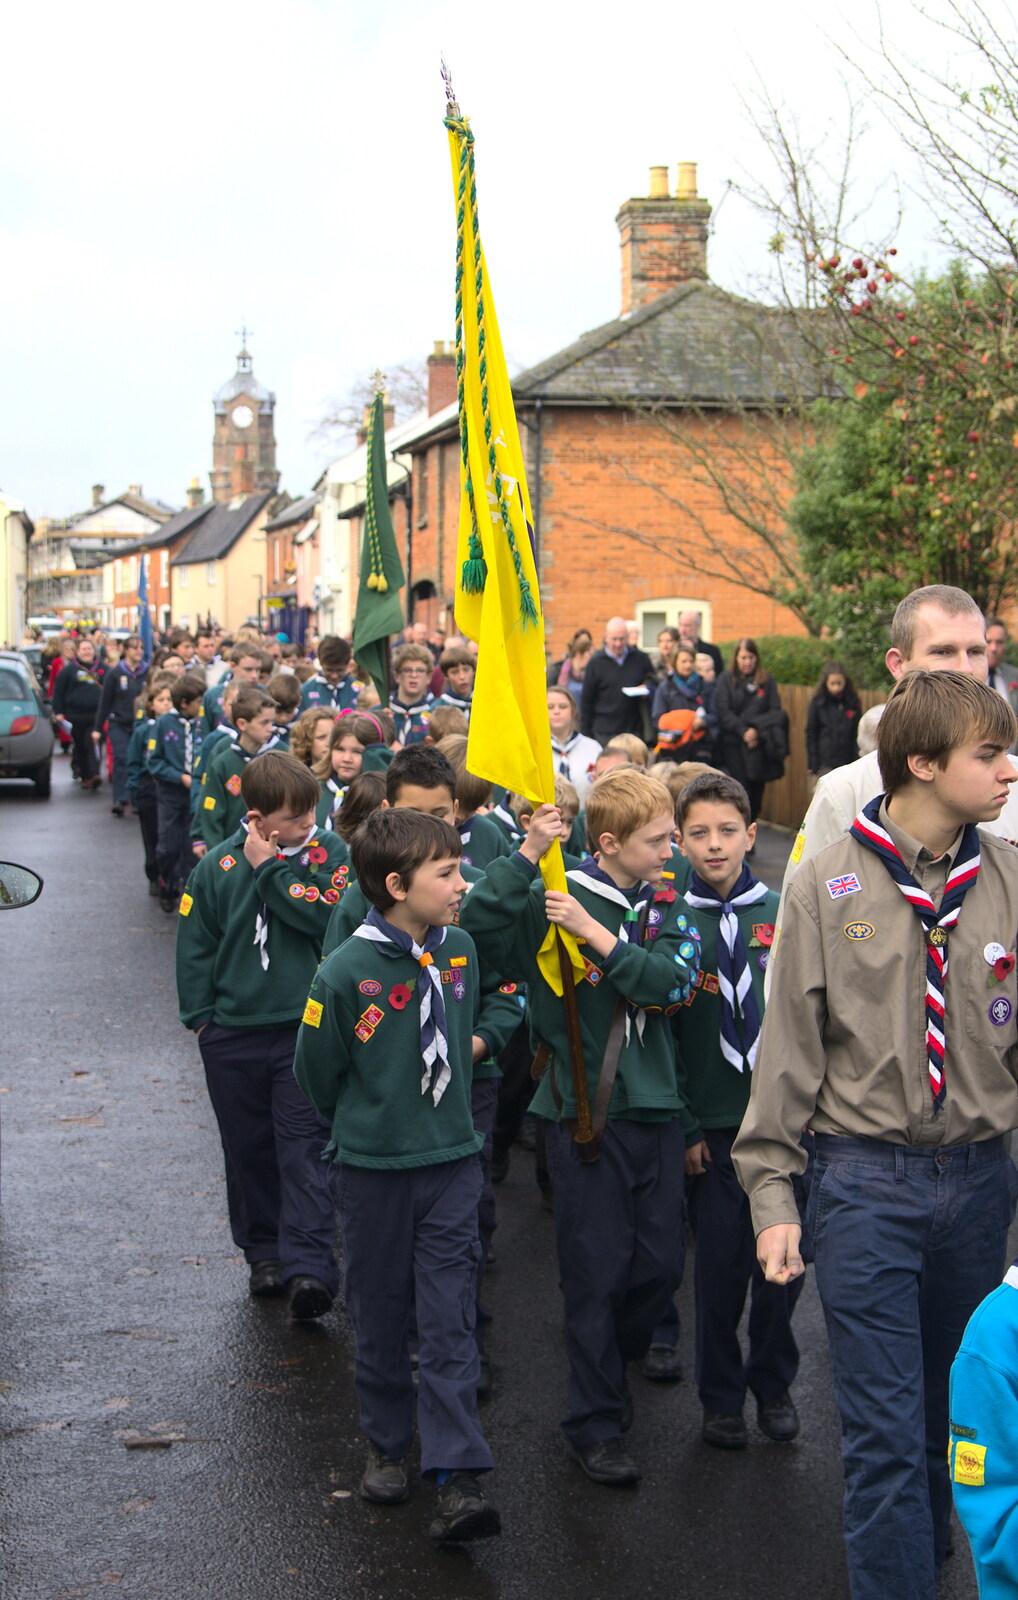 A load of scouts from A Remembrance Sunday Parade, Eye, Suffolk - 9th November 2014